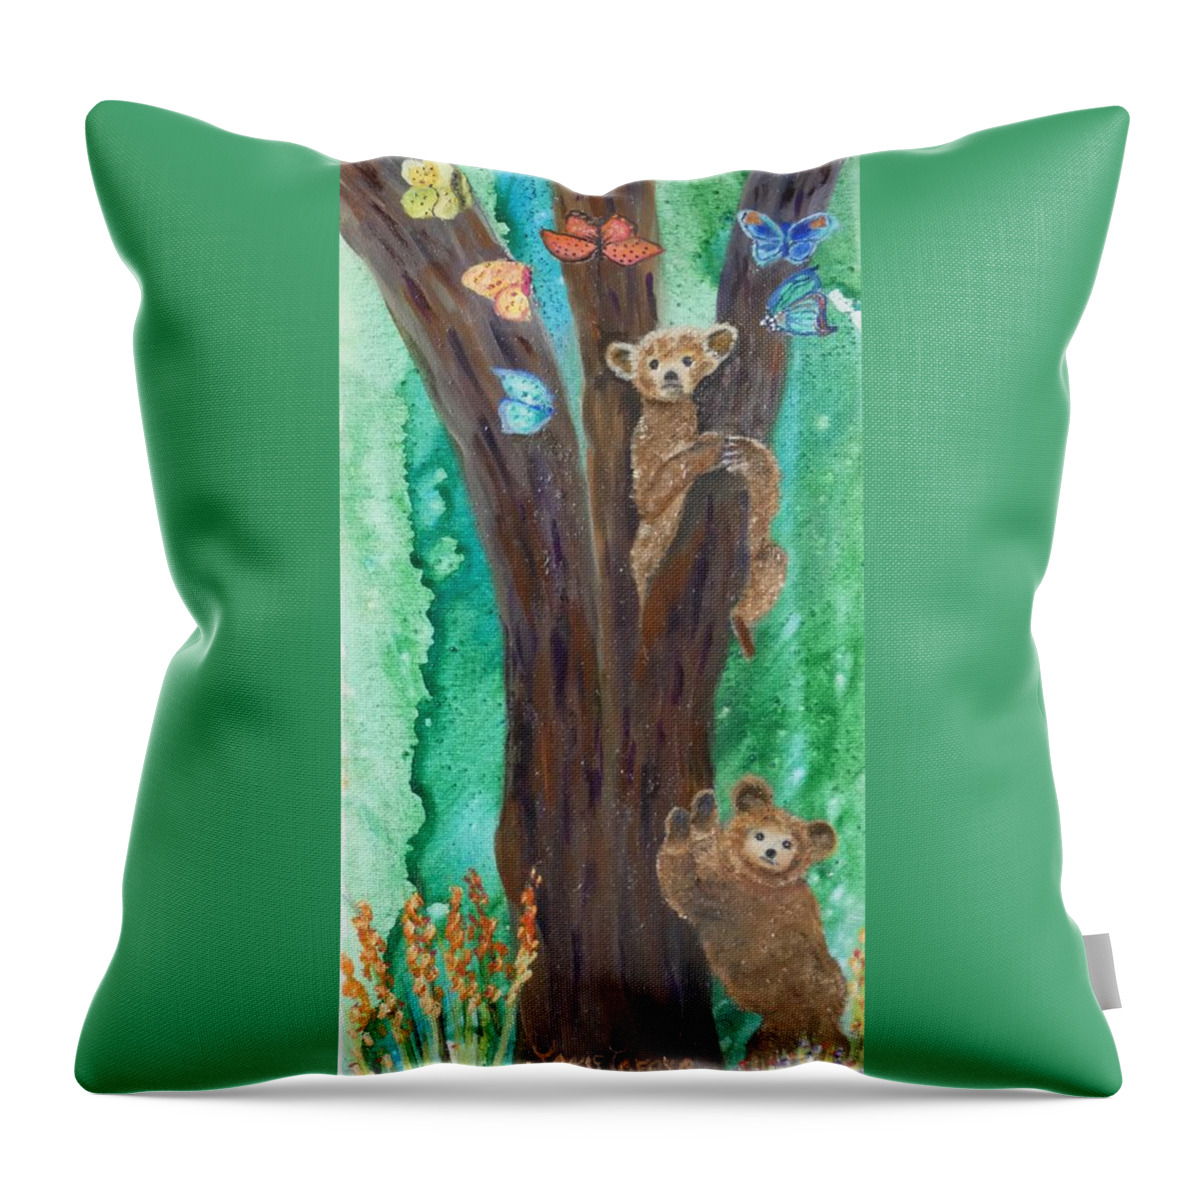 Bears Yoga Forest Tree Artwork Flowers Butterflies Original Landscape Fantasy Throw Pillow featuring the painting Yoga Bears in Colorado Forest by Janis Tafoya